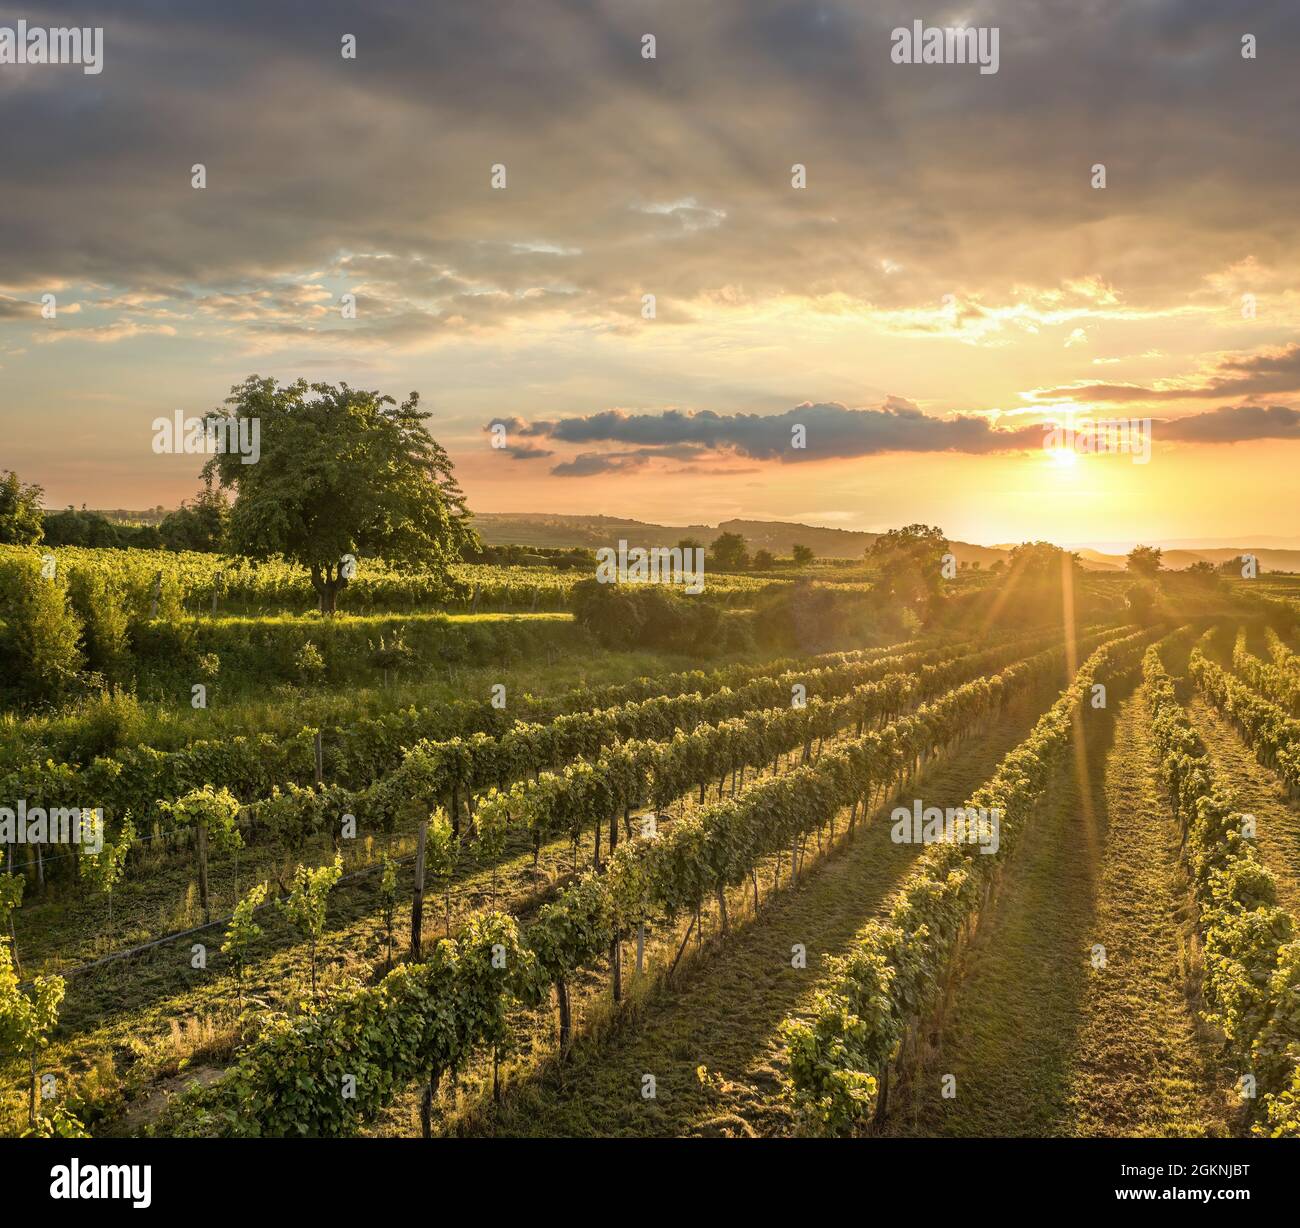 Colorful sunset over vineyards in Wachau valley, Lower Austria, Austria Stock Photo